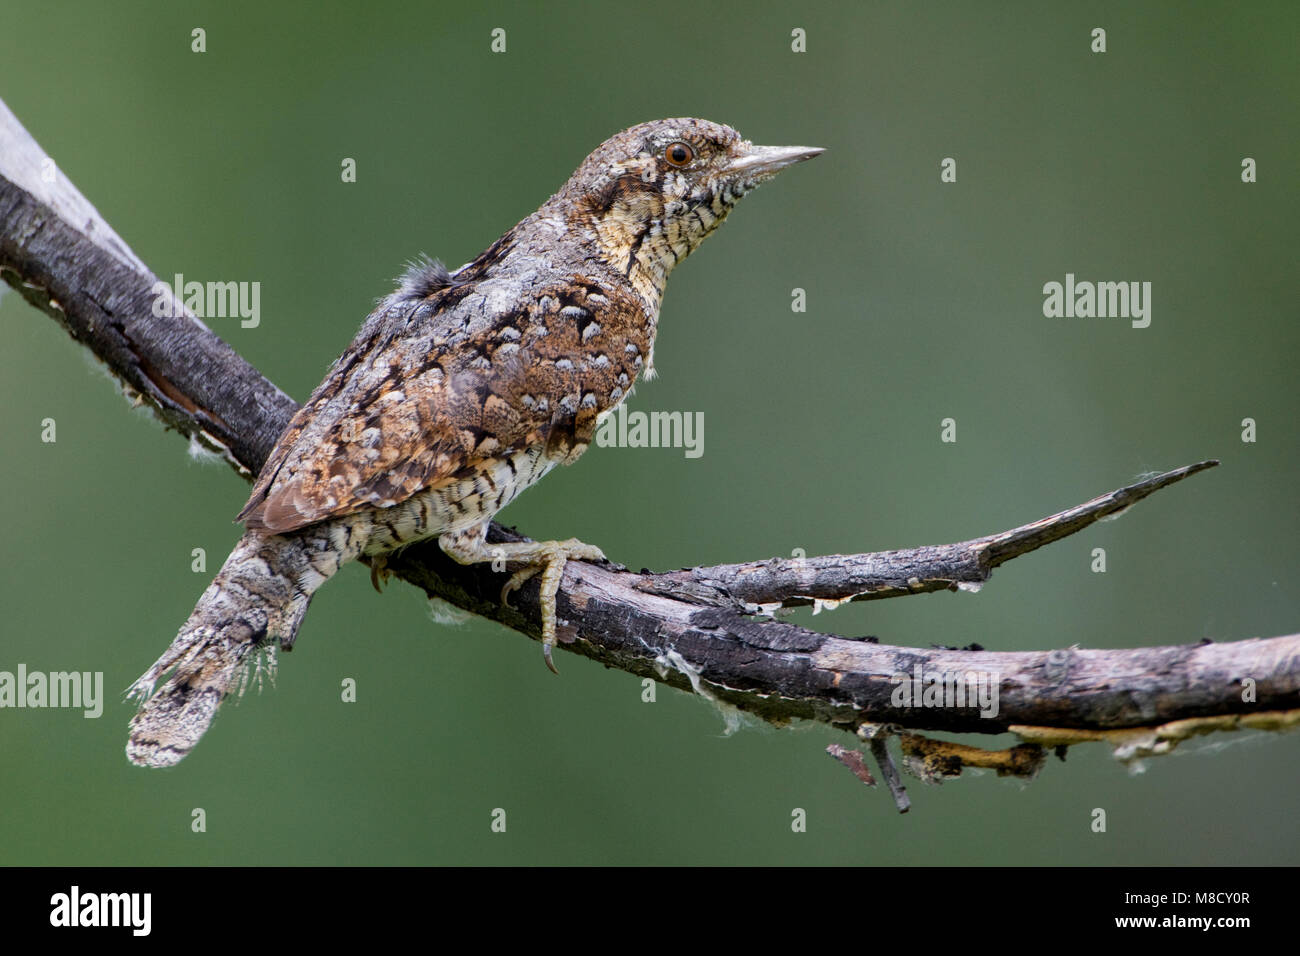 Draaihals zittend; Eurasian Wryneck perched Stock Photo